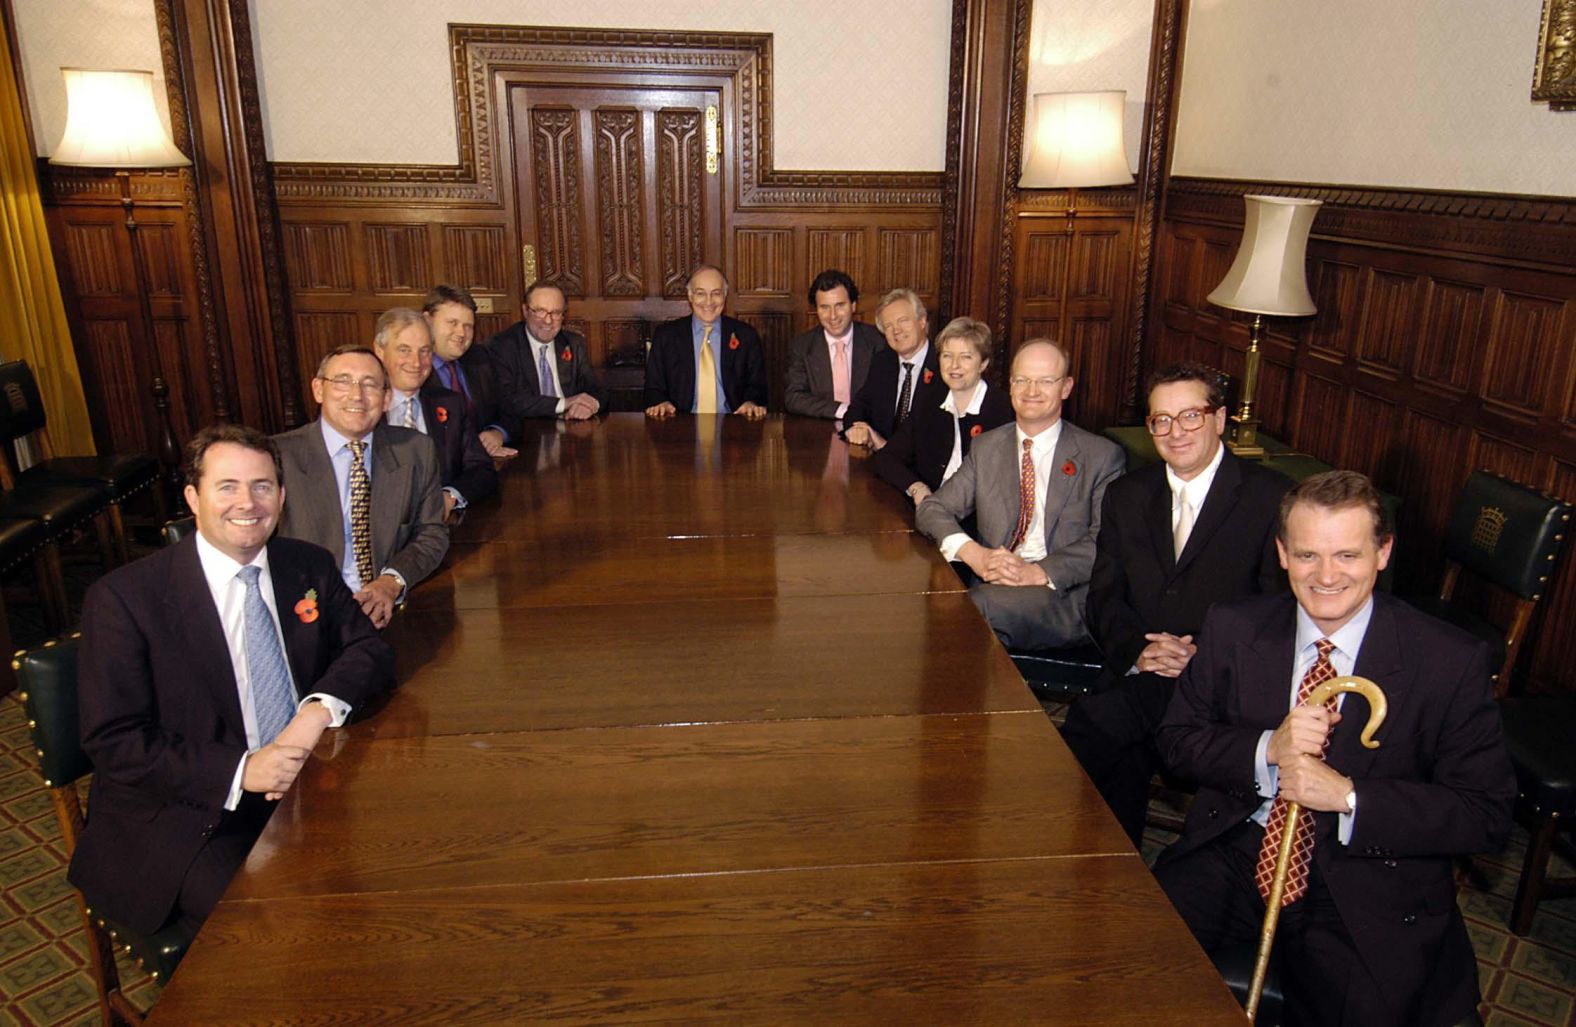 May and the rest of the shadow Cabinet in November 2003. The shadow Cabinet is the opposition party's senior leadership. May held various posts while in Parliament.